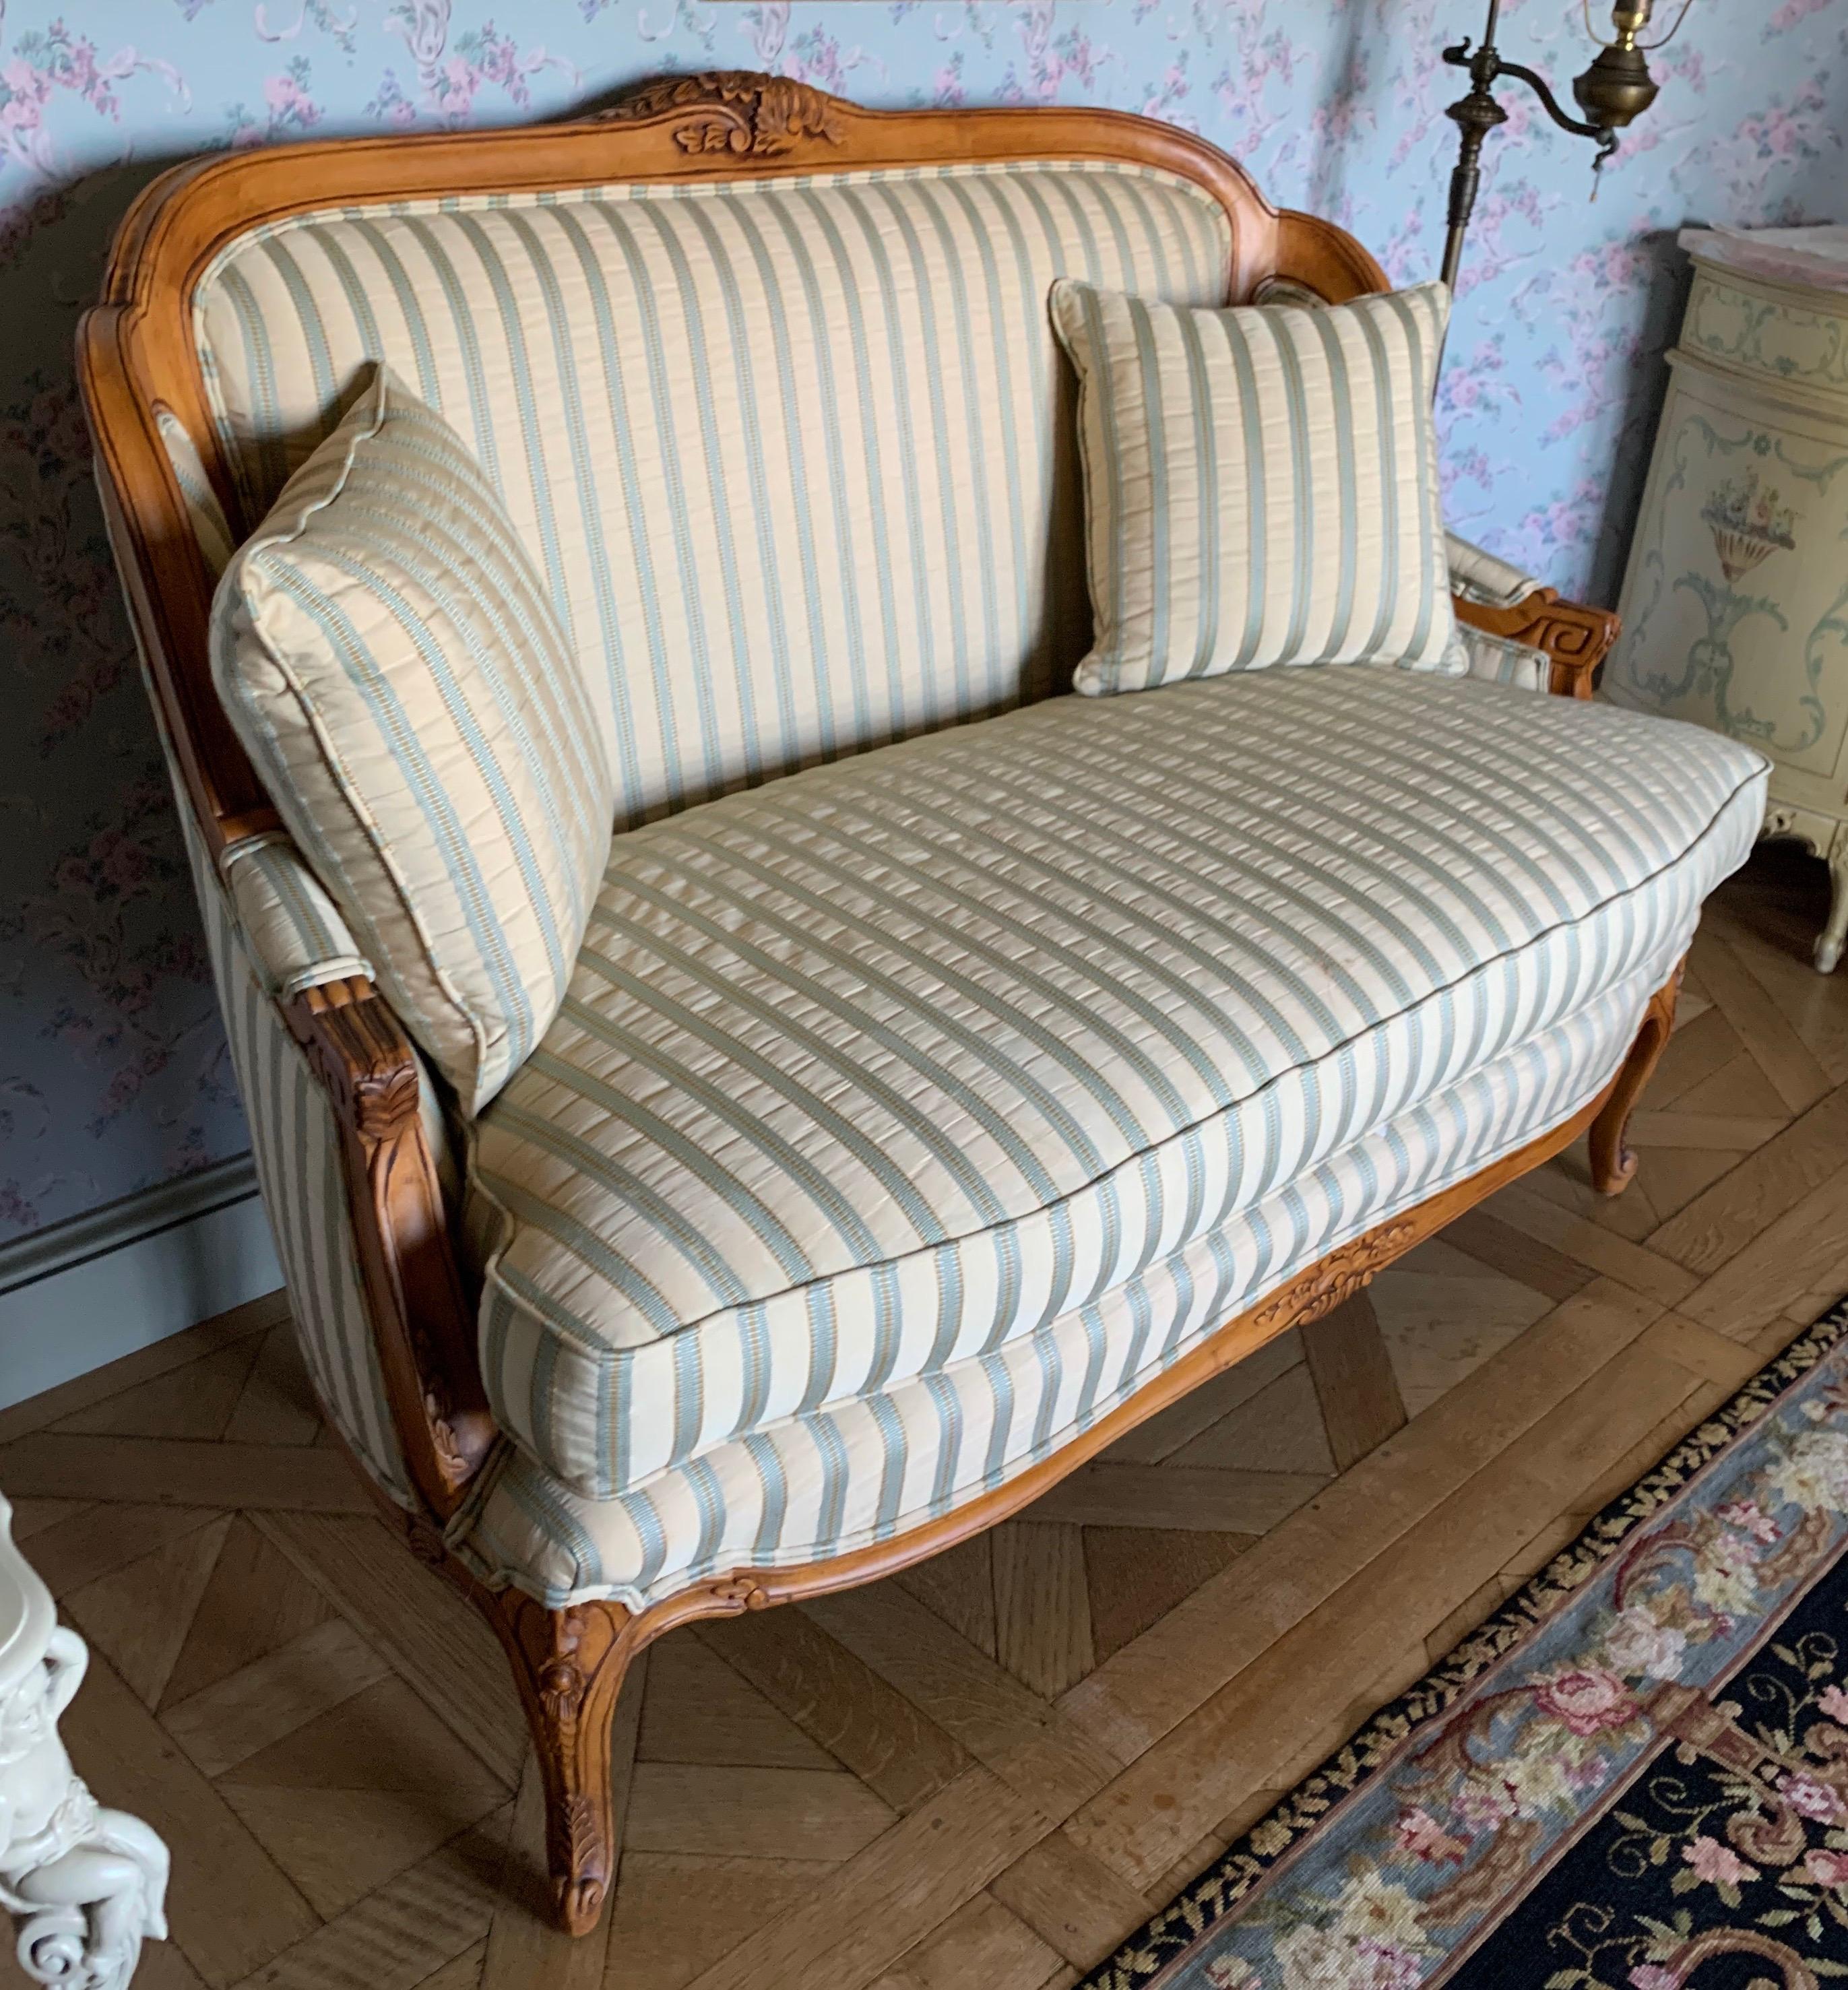 French carved beechwood loveseat with new striped silk upholstery in teal blue and gold. Features intricate carvings on the crest, arms and legs. Comes with two throw pillows. Custom piece of Farifield Furniture in Lenor, N.C., USA.